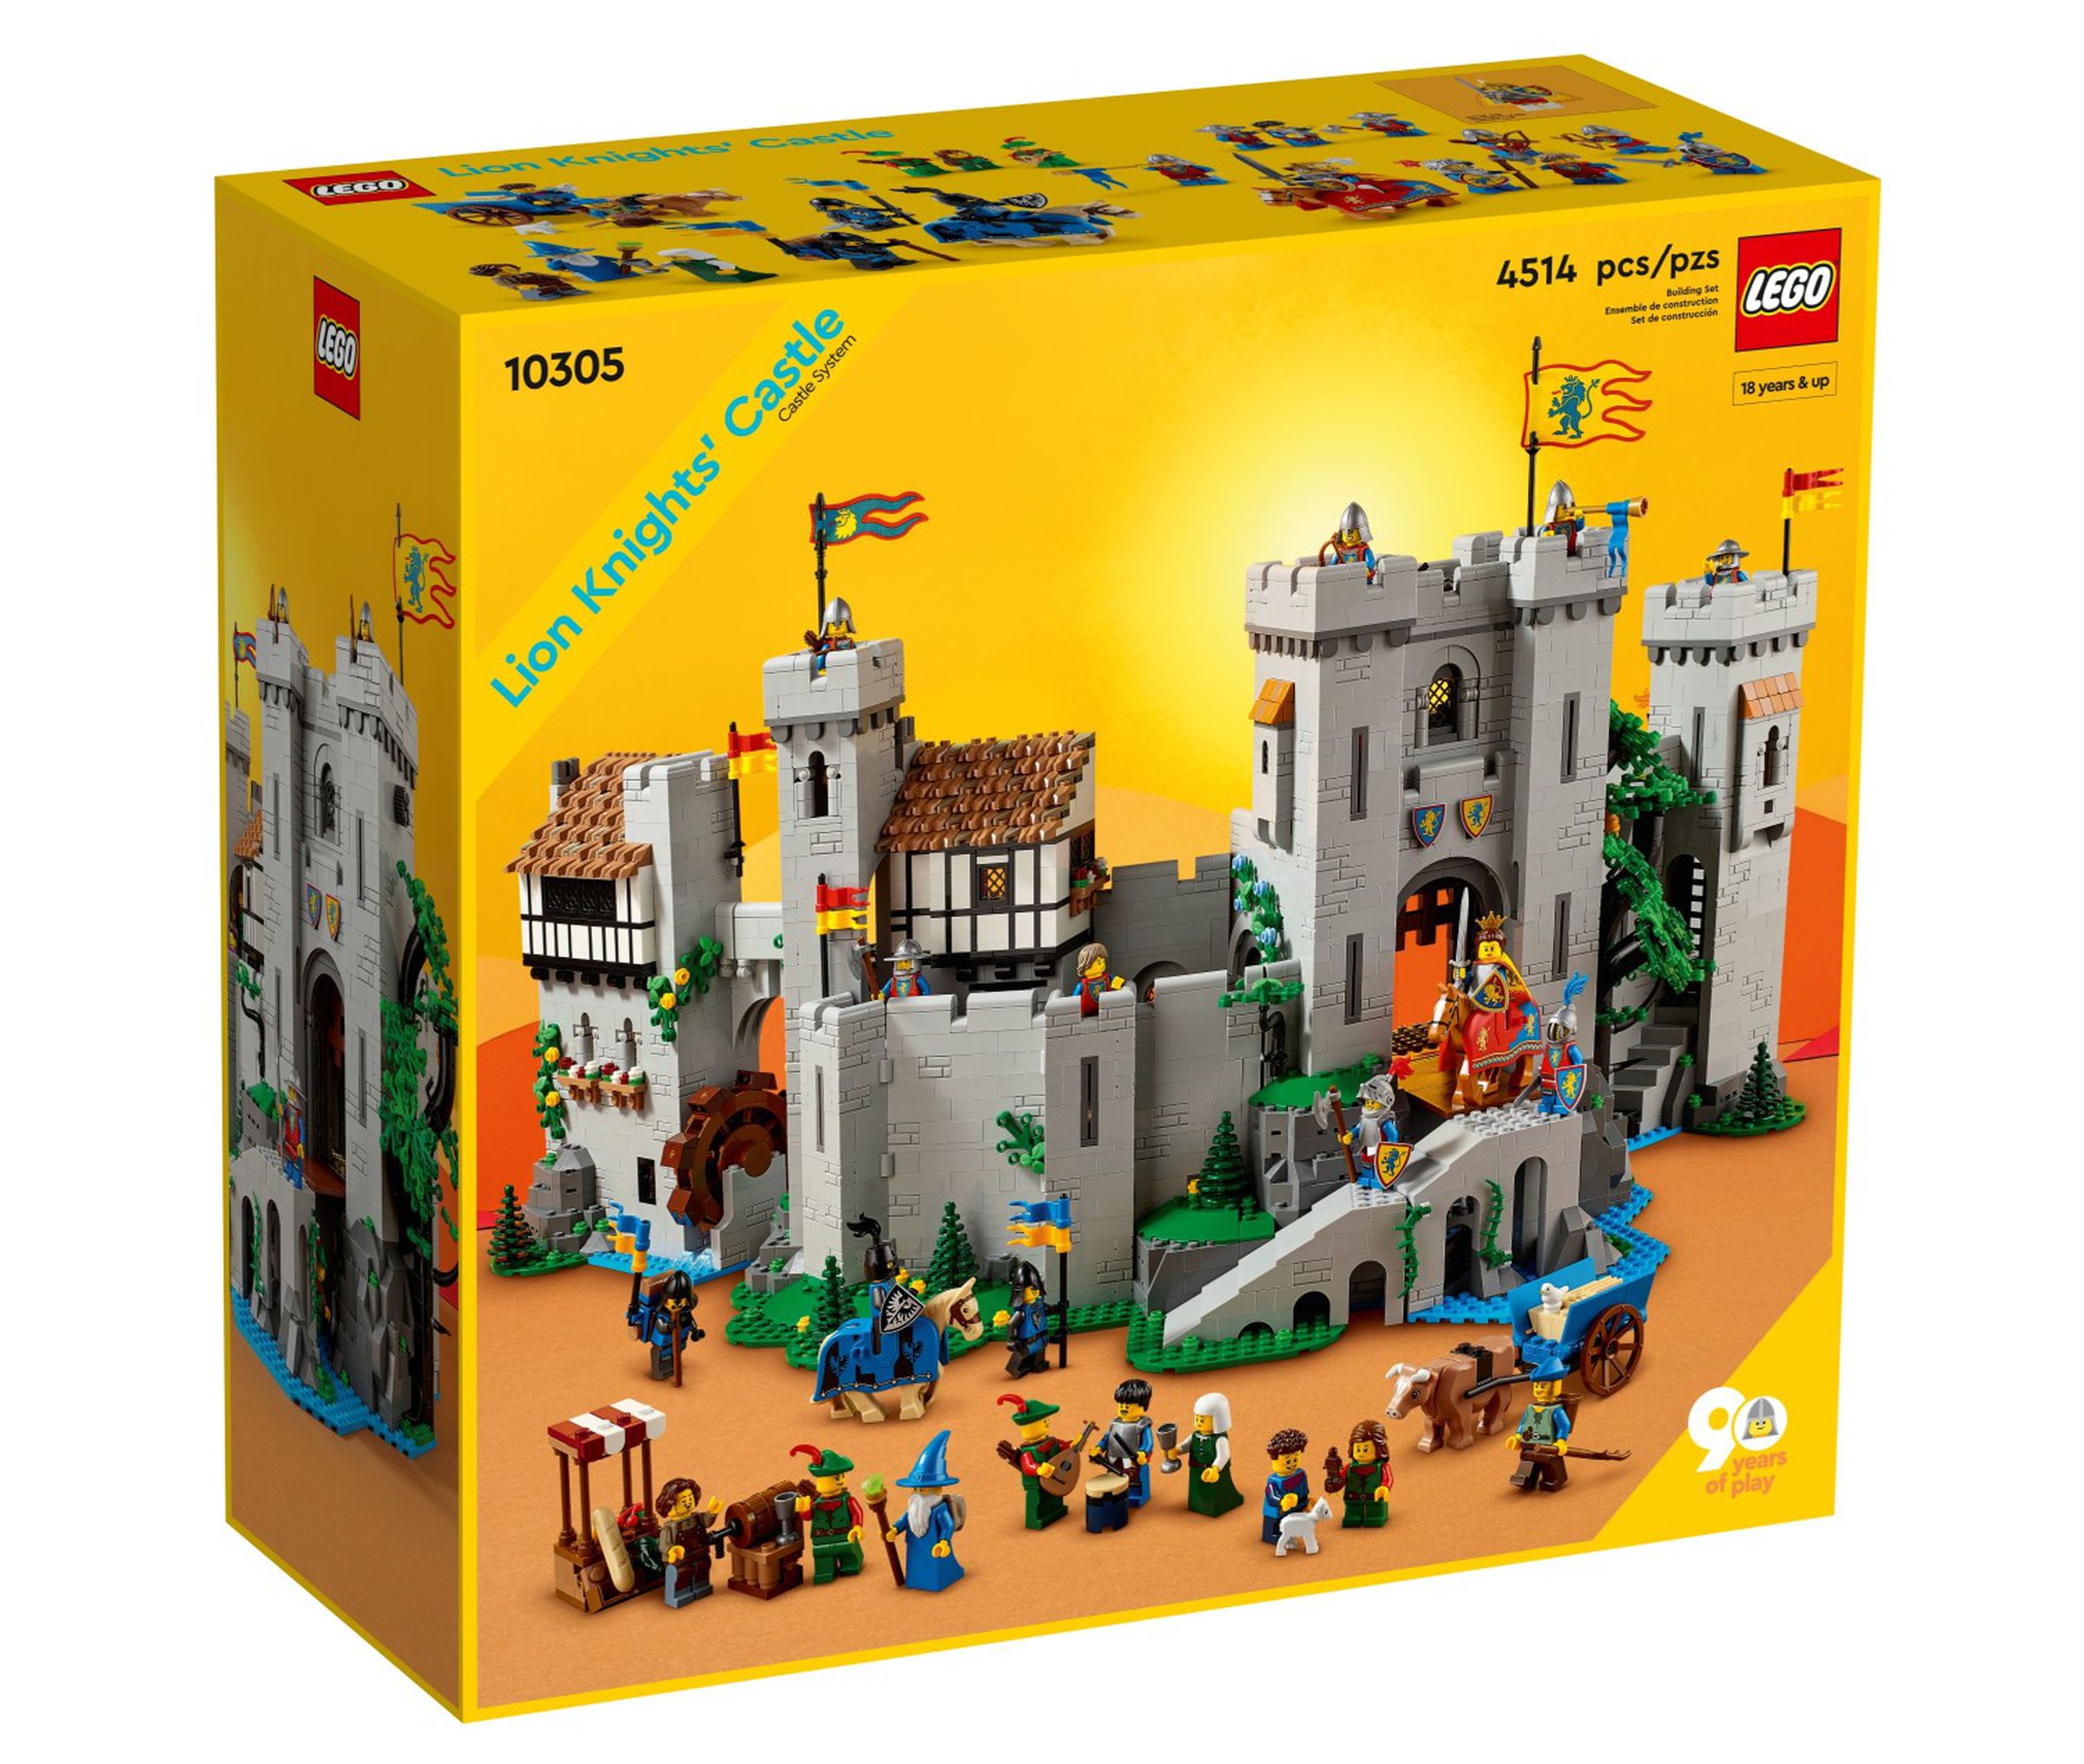 A big classic yellow styled Lego box showing a castle playset.